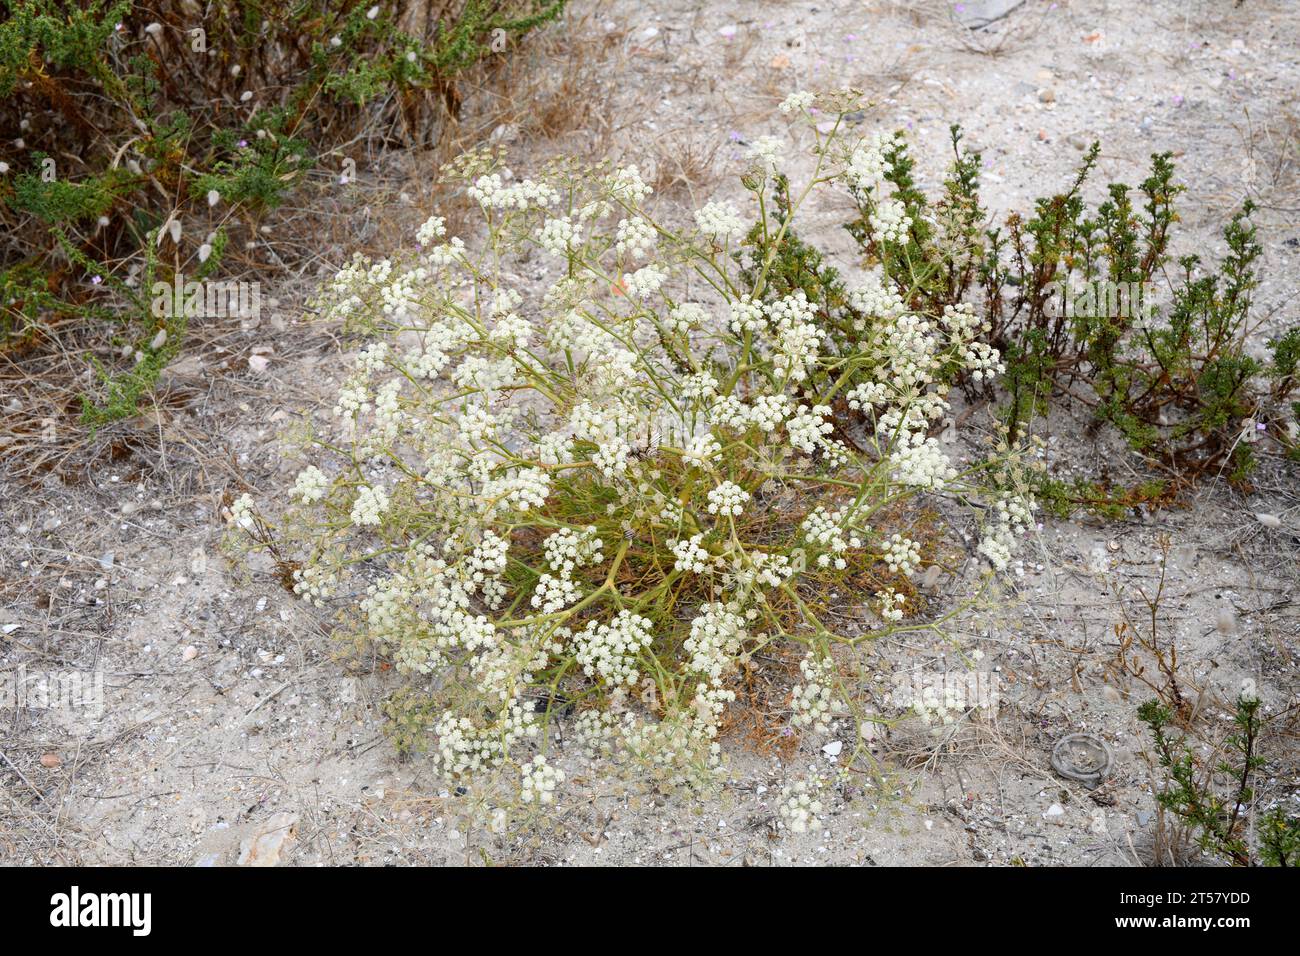 Enjalme (Seseli tortuosum) is a perennial plant native to southern Europe and northwestern Africa. This photo was taken in Aveiro, Portugal. Stock Photo